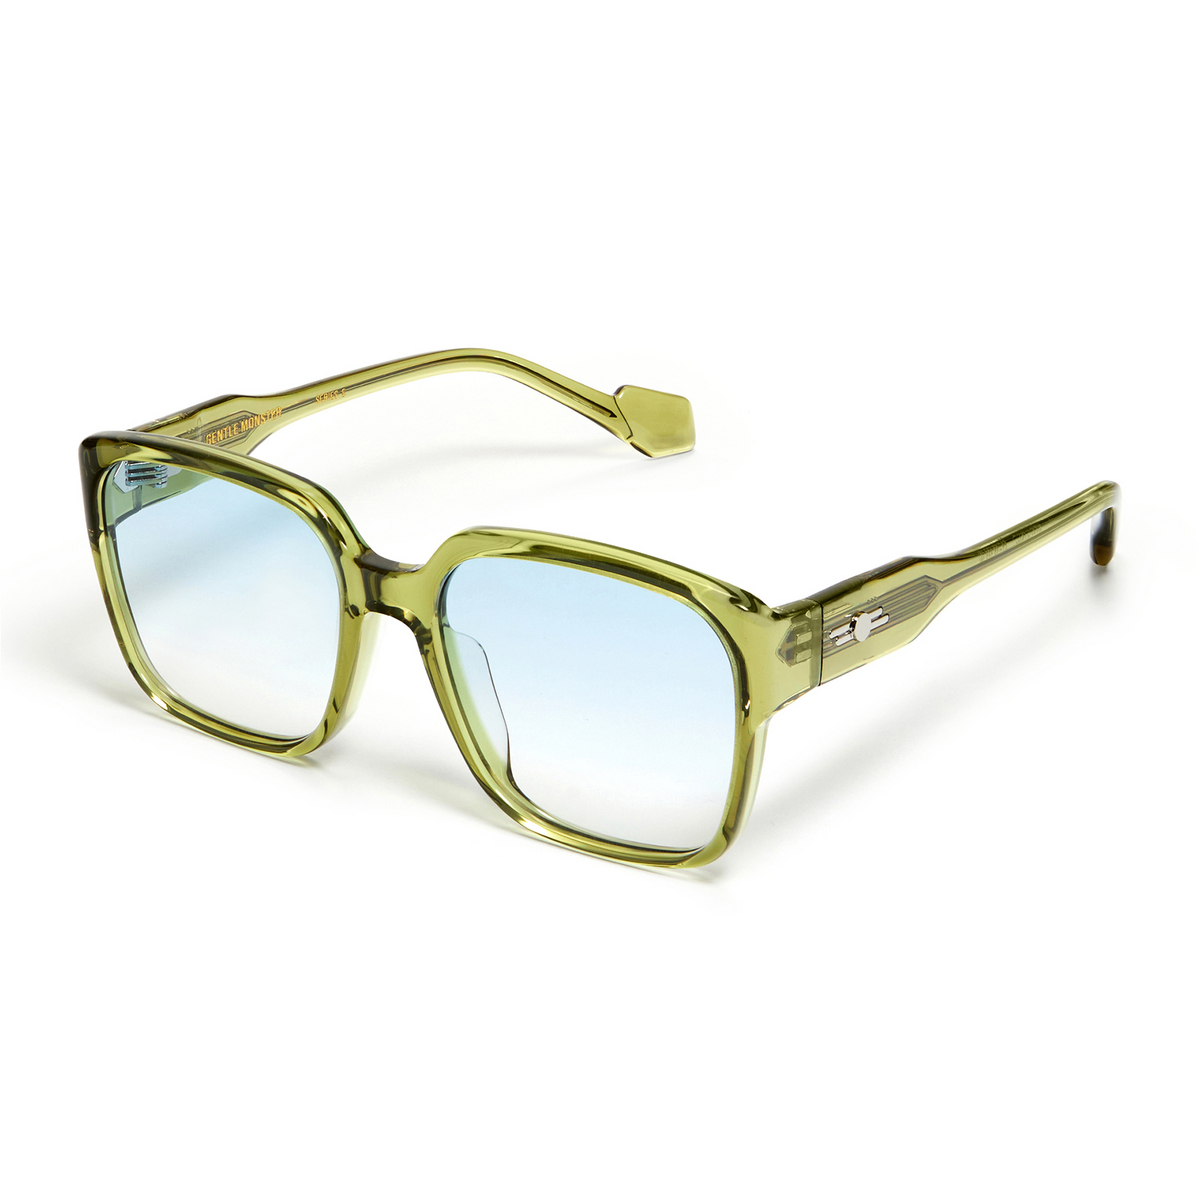 Gentle Monster® Square Eyeglasses: Loopy color OL1 Green - three-quarters view